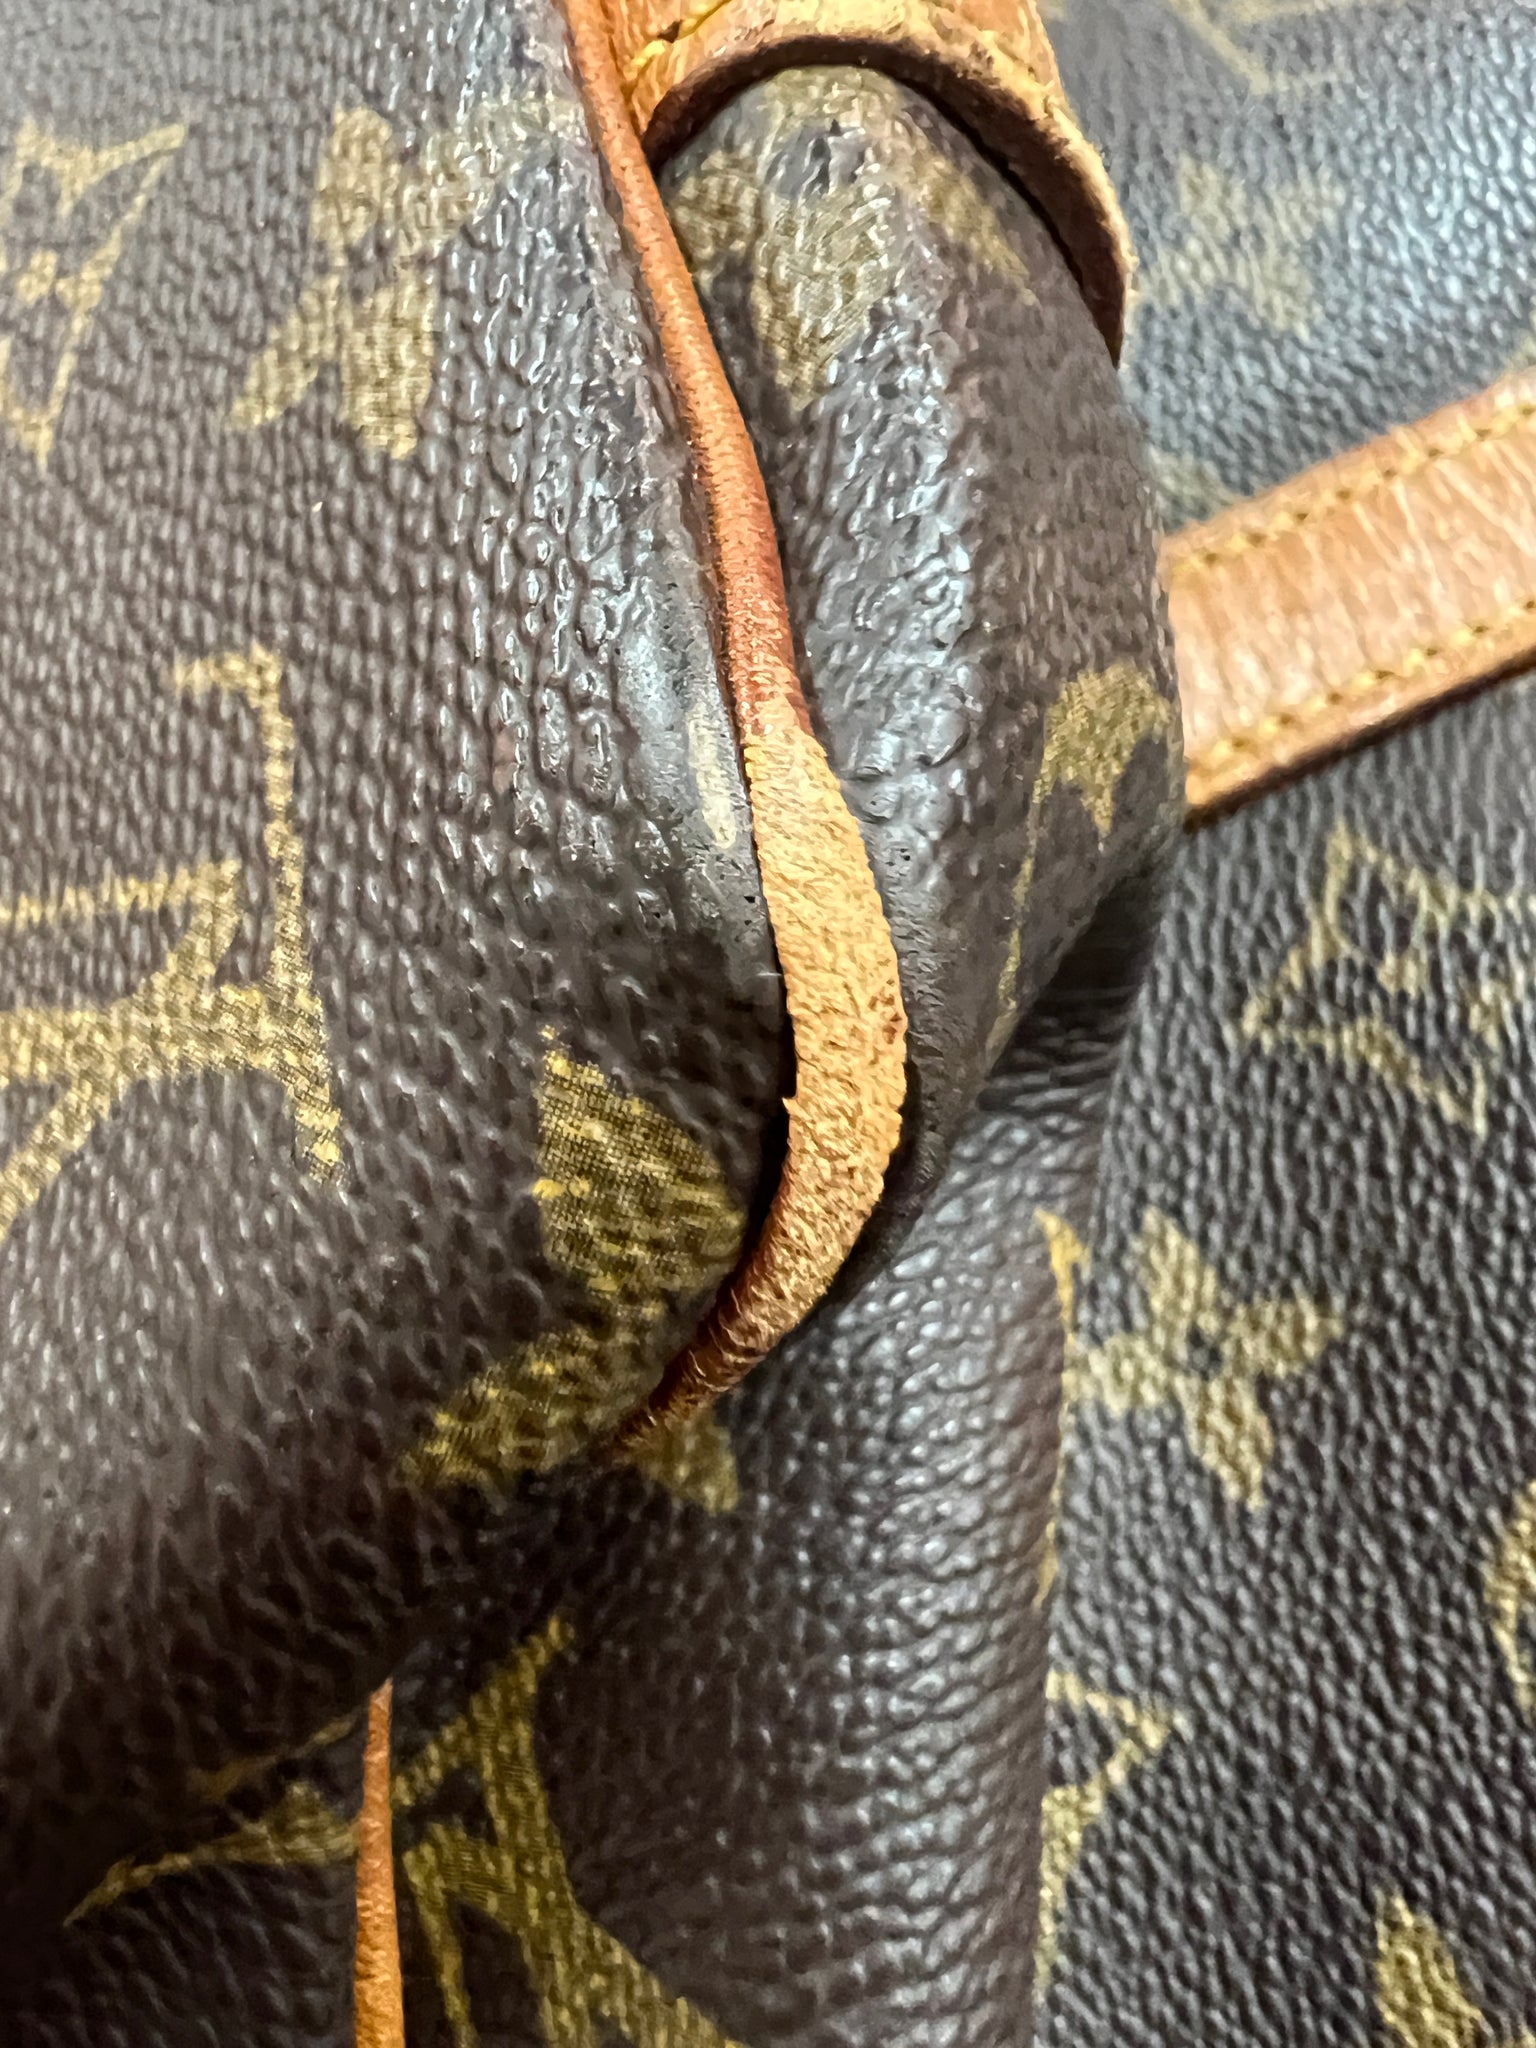 Real Deal Collection - Classic Louis Vuitton Sac Shopping Totelet's go  shopping!! #realdealcollection #downtownsantafe #shopsmallbusiness  #springbreak #shopconsignment #vintagebags #louisvuitton